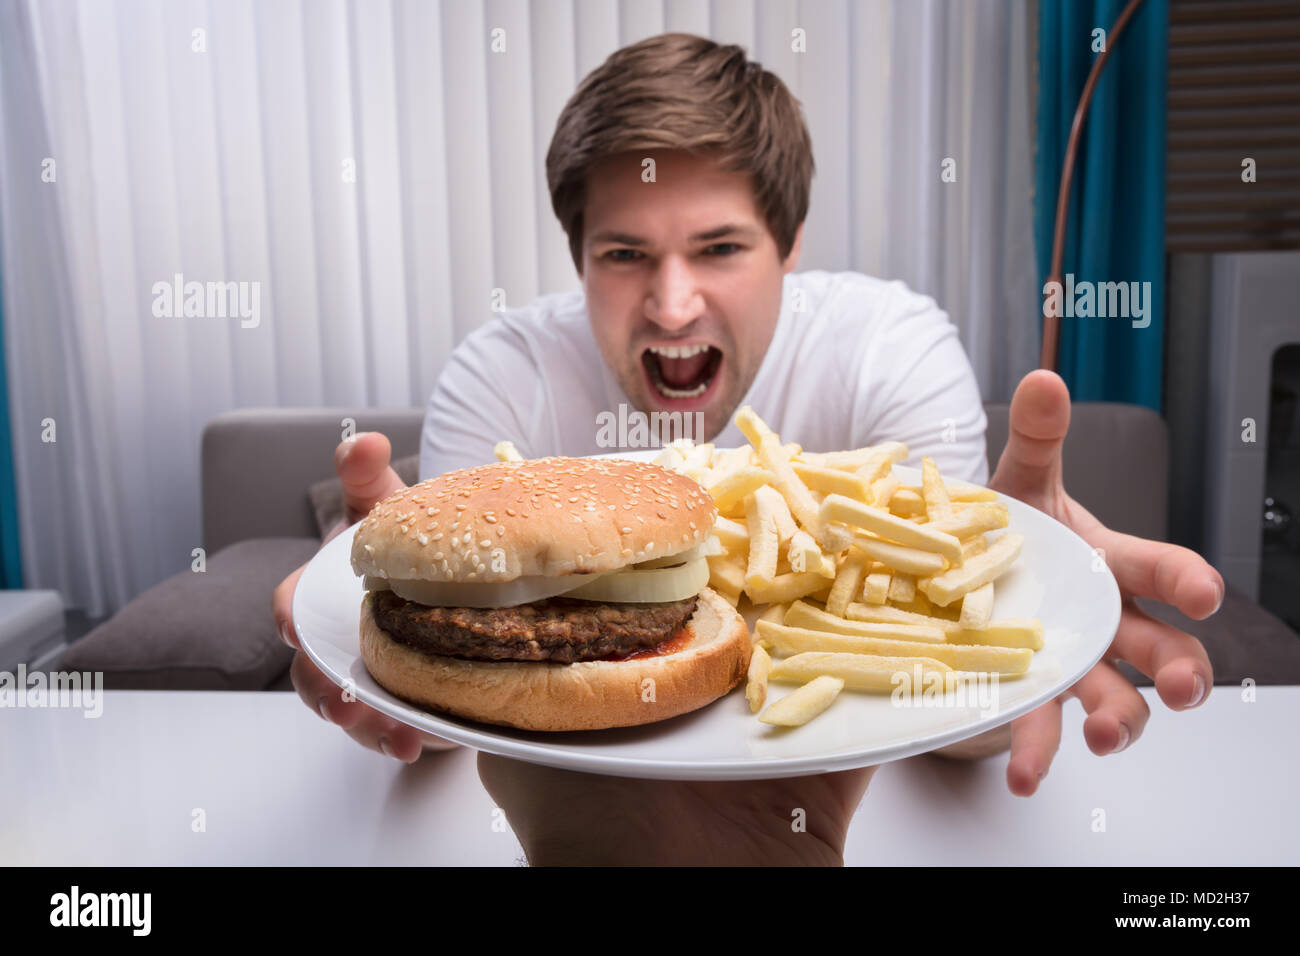 Man Taking Junk Food On Plate Offered By A Person Stock Photo